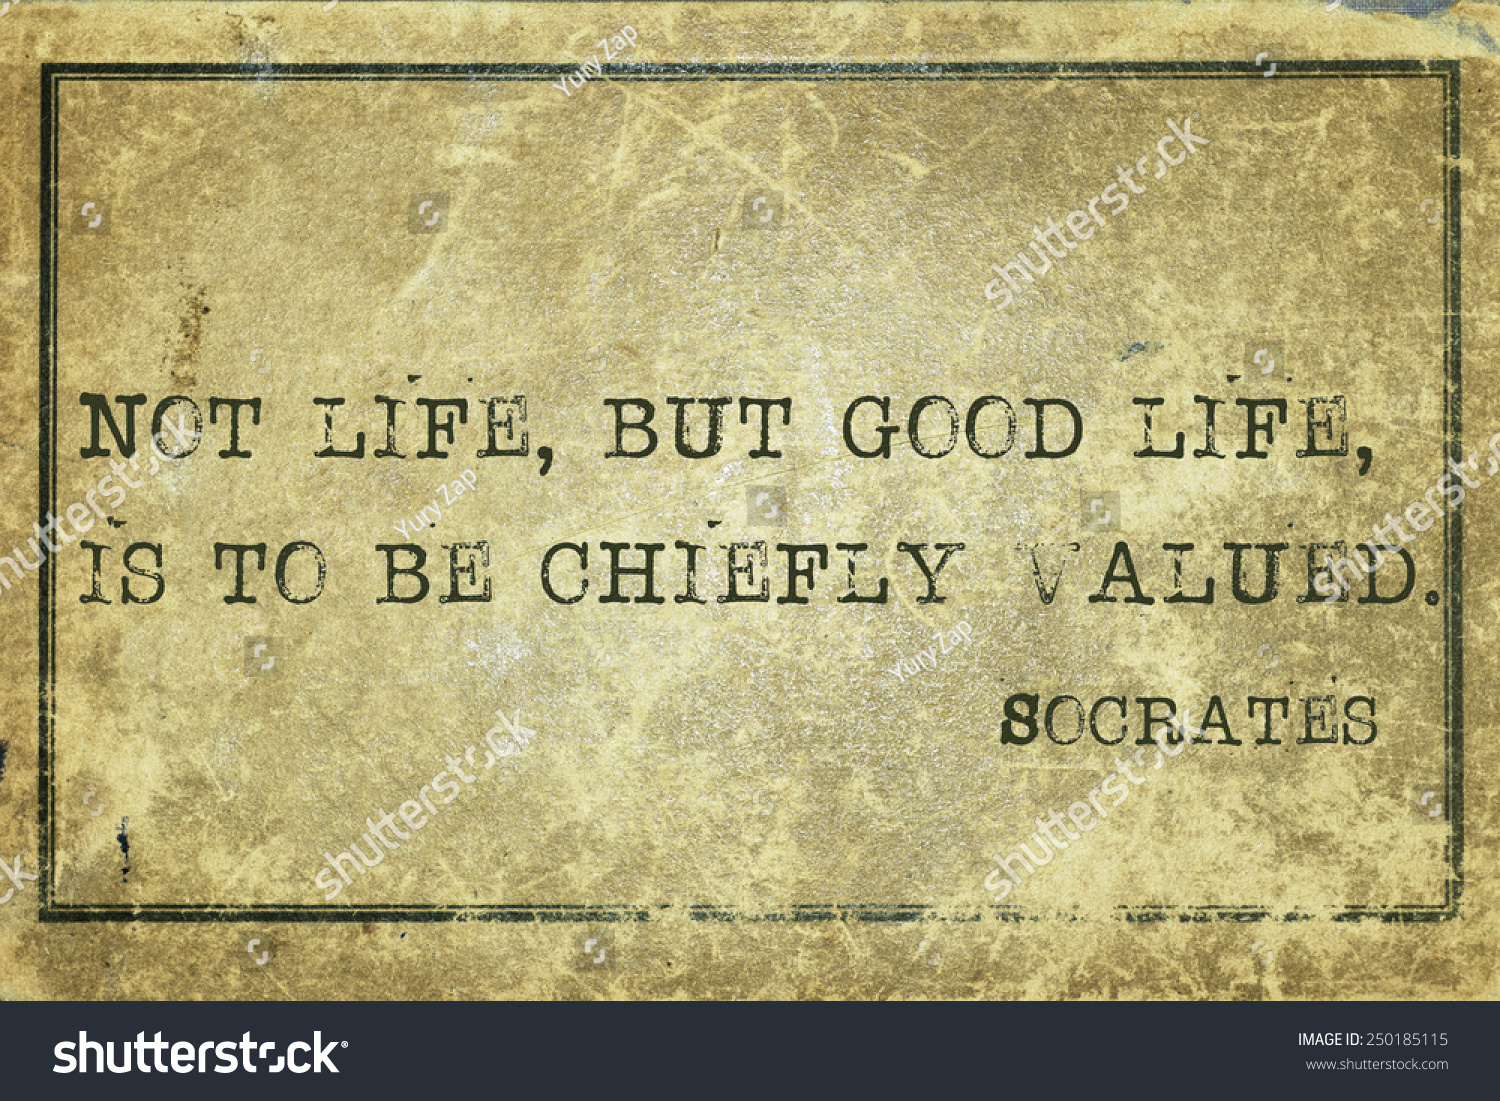 Not life but good life ancient Greek philosopher Socrates quote printed on grunge vintage